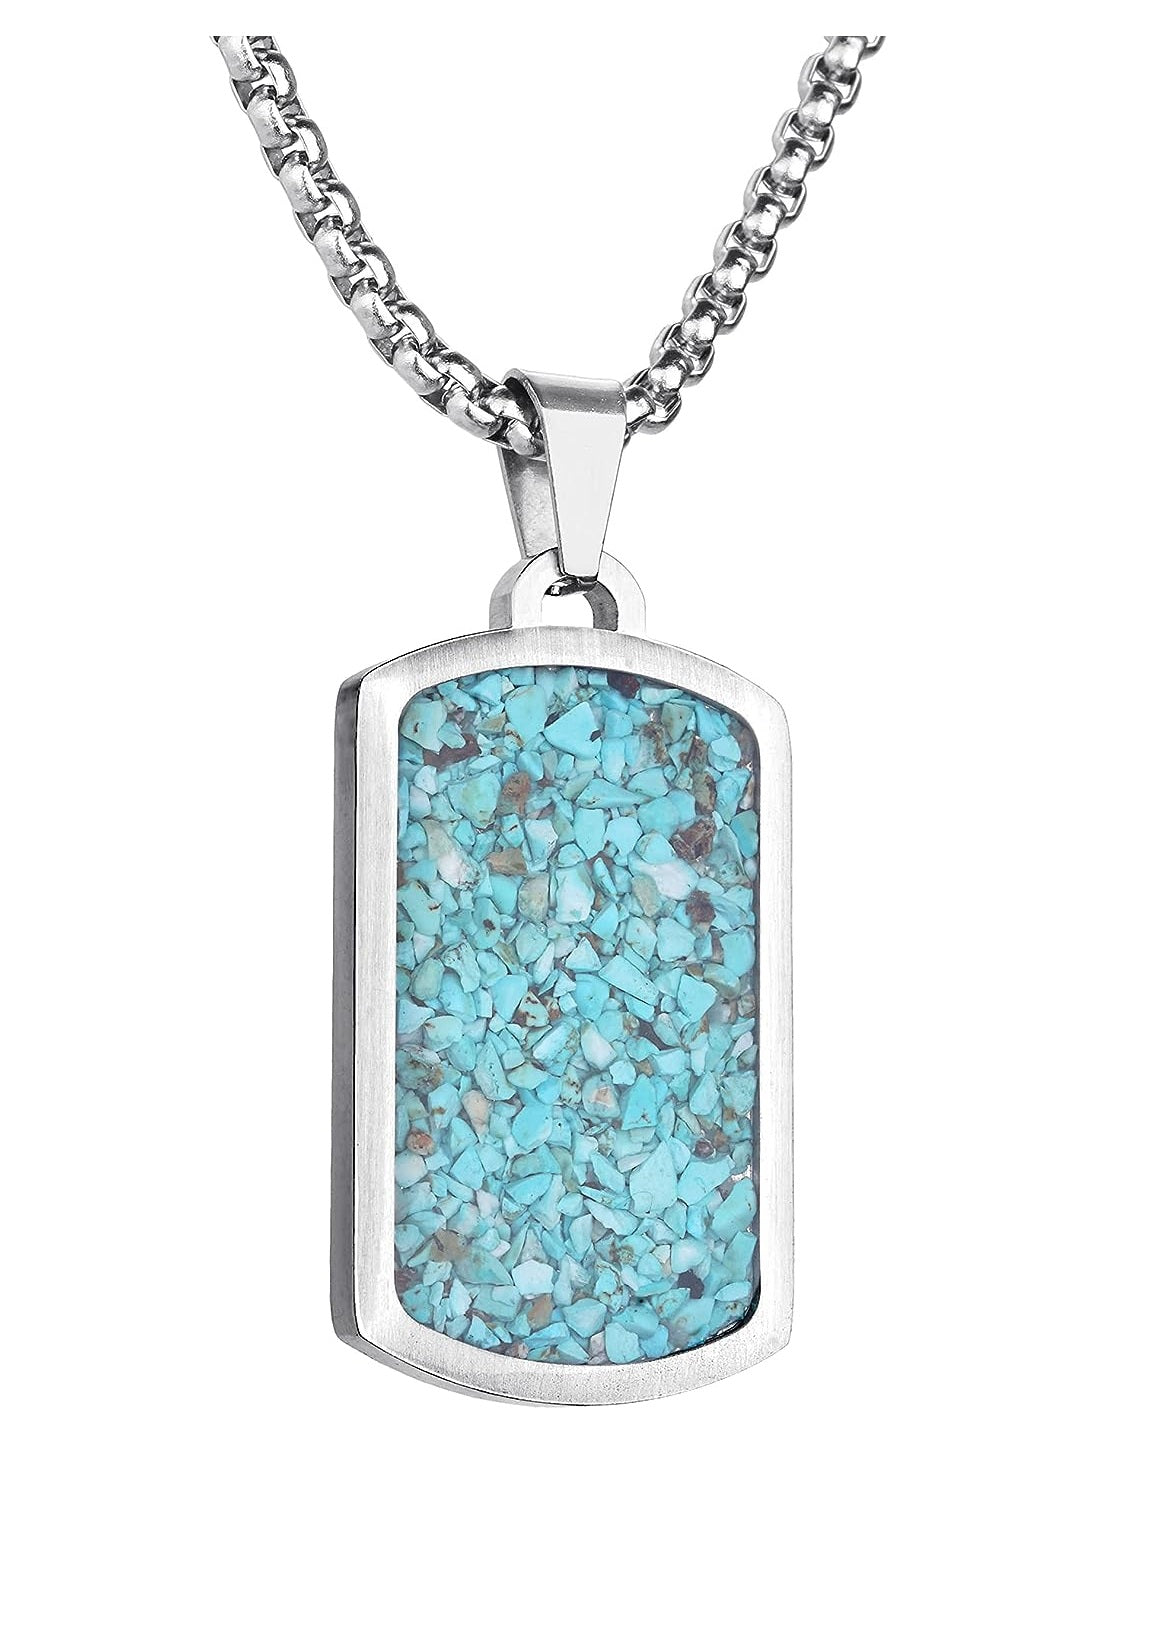 Stainless Steel Gemstone Dog Tag Necklace - Green Turquoise